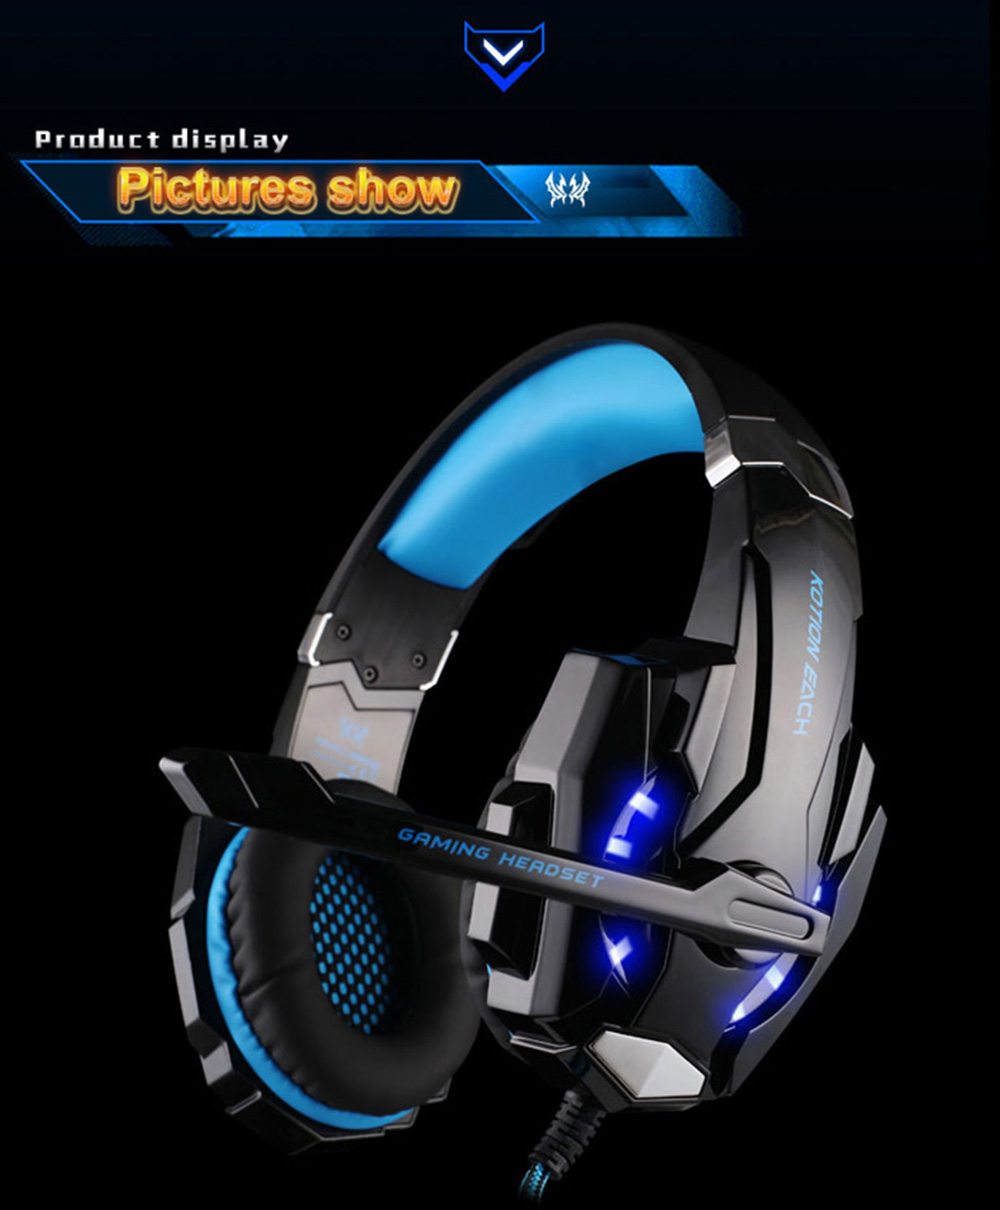 KOTION EACH G9000 Gaming Headphone 3.5mm Game Headset Headphone for PS4 with Mic LED Light